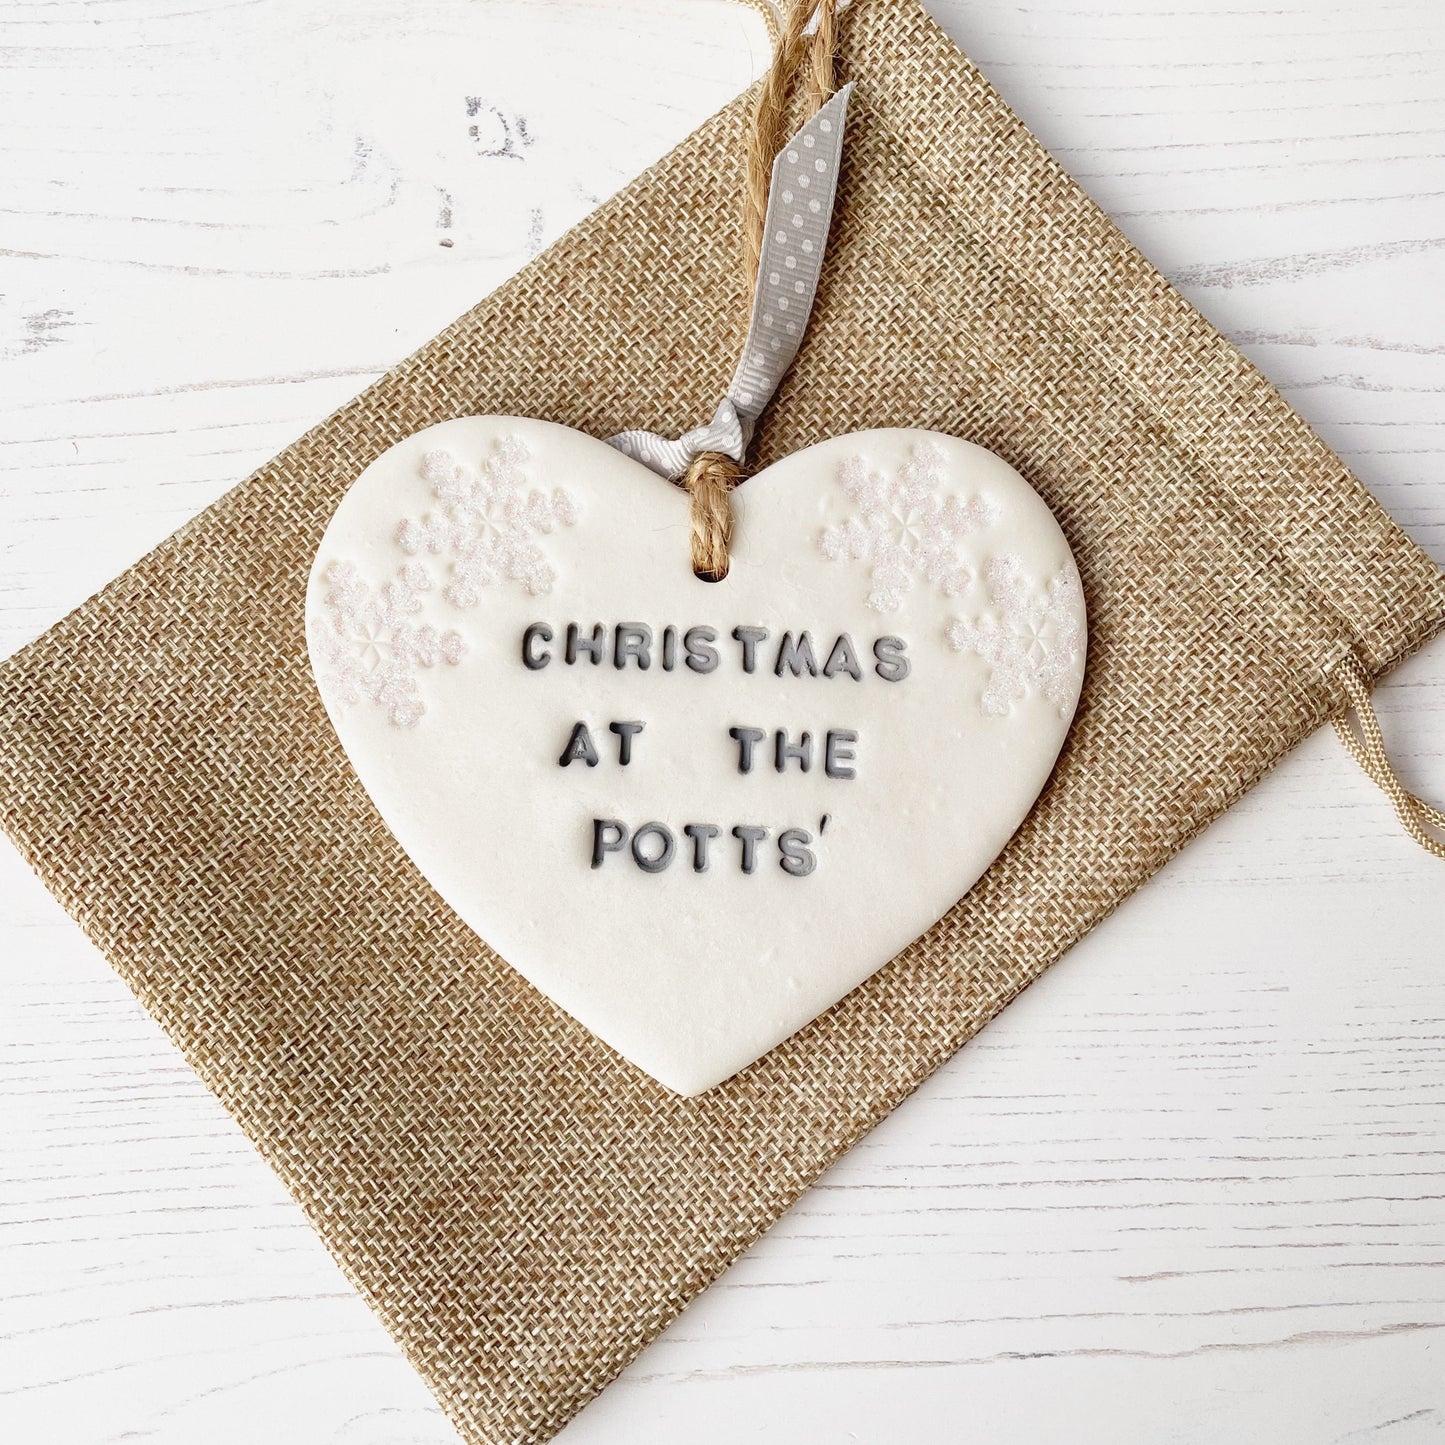 Personalised family Christmas heart ornament, pearlised white clay with CHRISTMAS AT THE POTTS’ painted grey, decorated with 2 iridescent glitter snowflakes on either side of the top of the heart